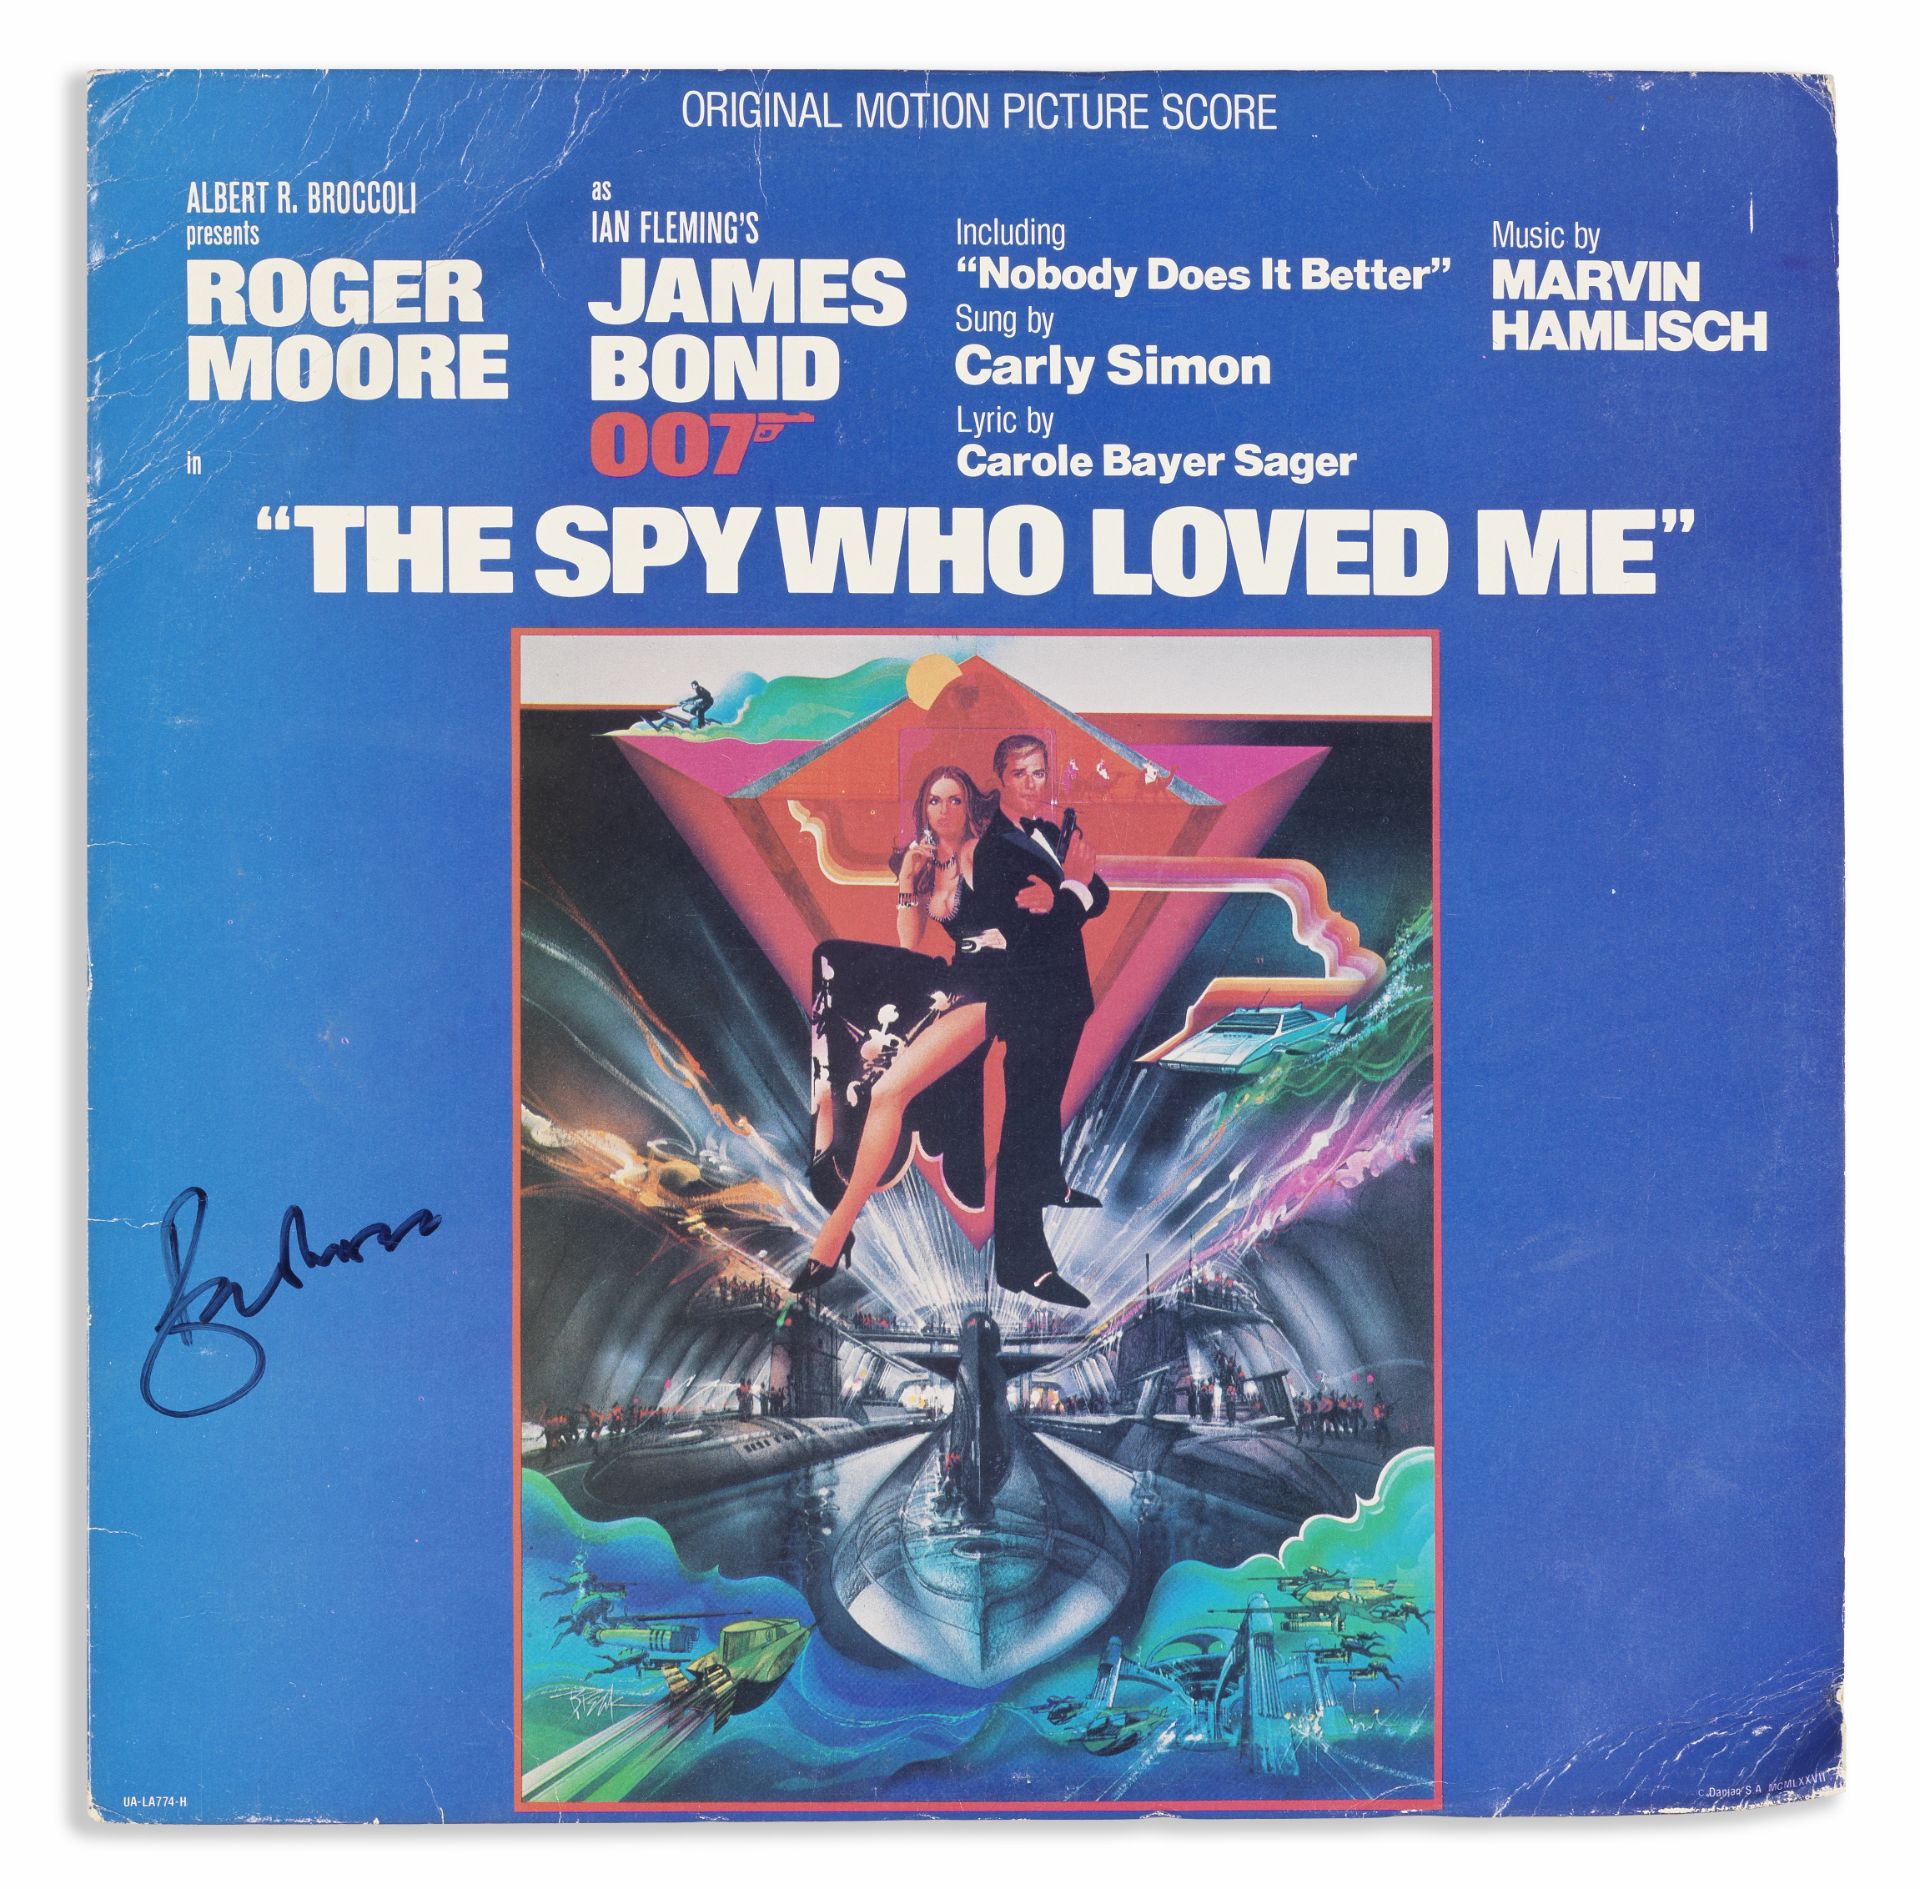 A signed The Spy Who Loved Me vinyl motion picture soundtrack